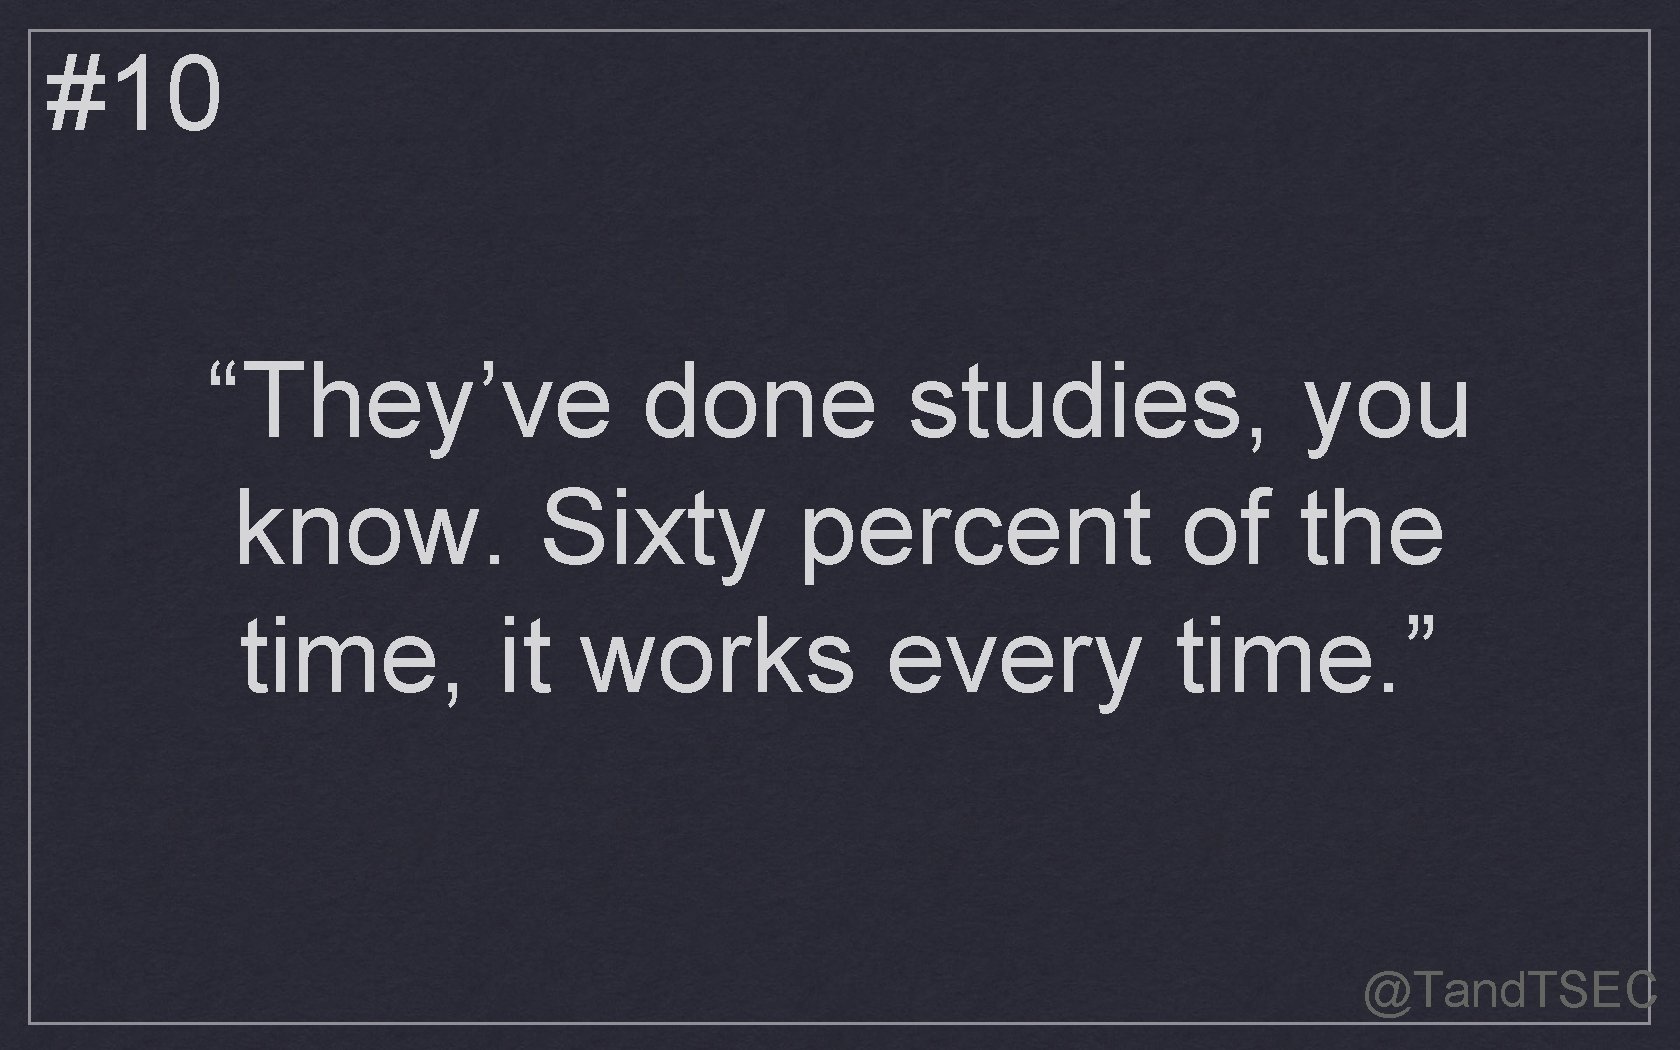 #10 “They’ve done studies, you know. Sixty percent of the time, it works every